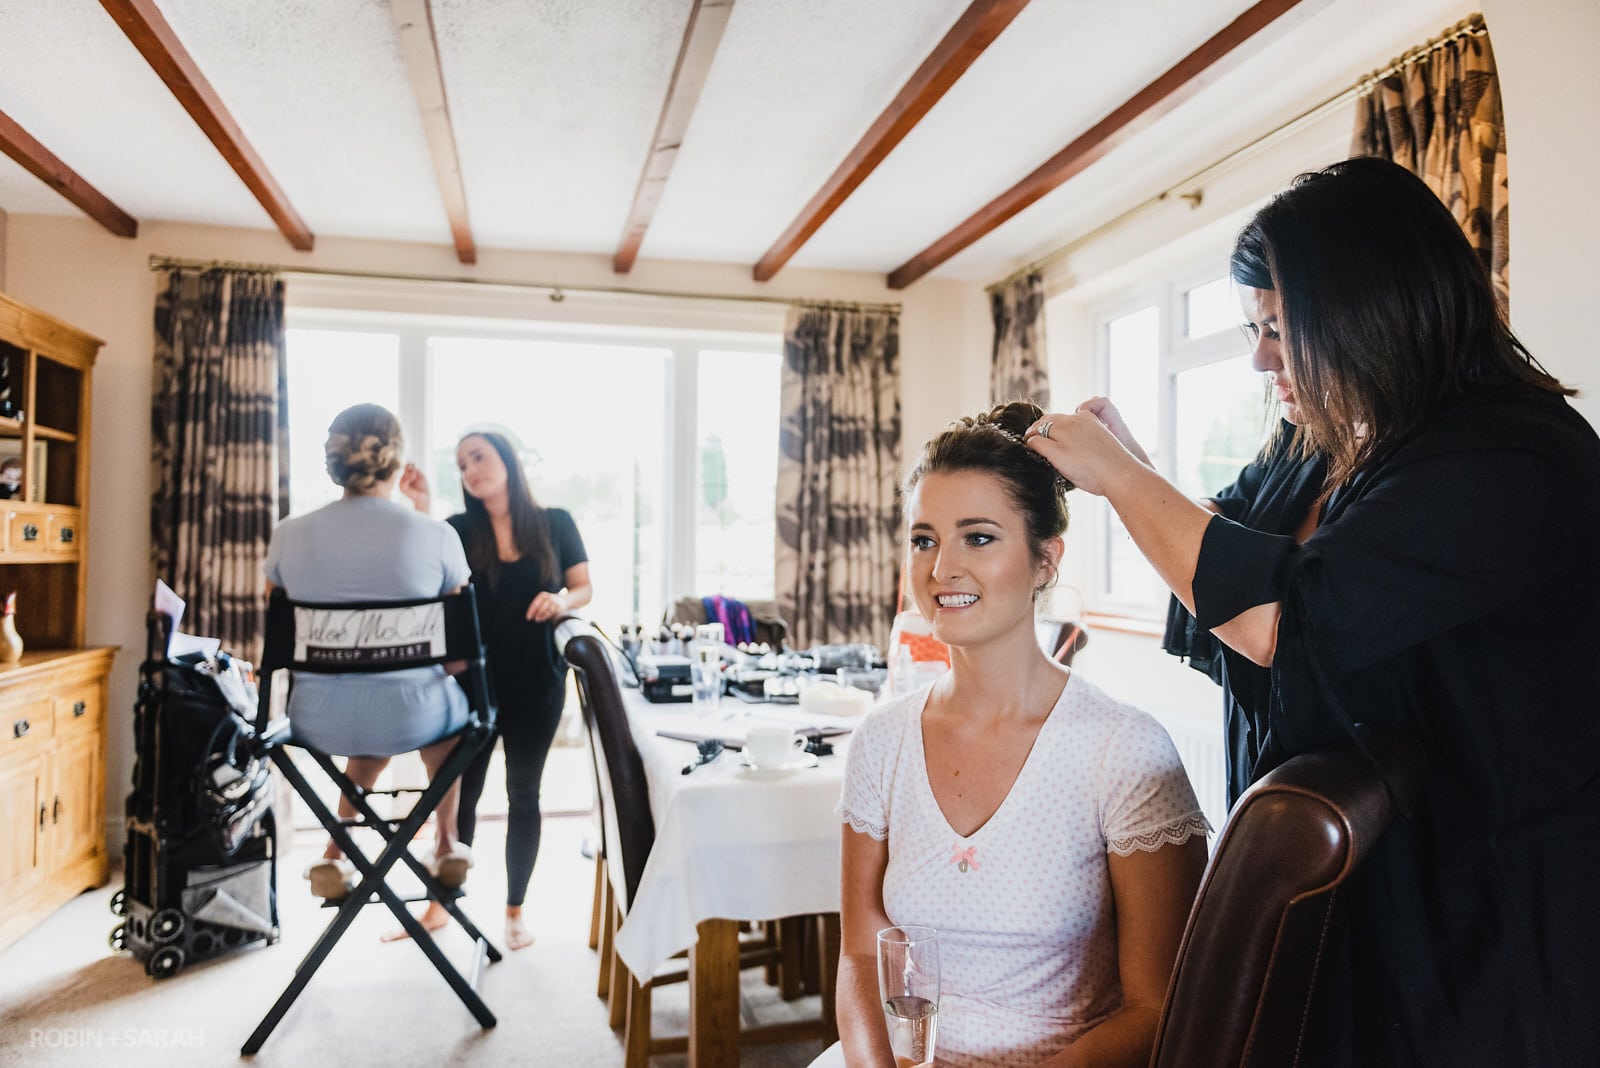 Bride has hair styled while bridesmaid has makeup applied